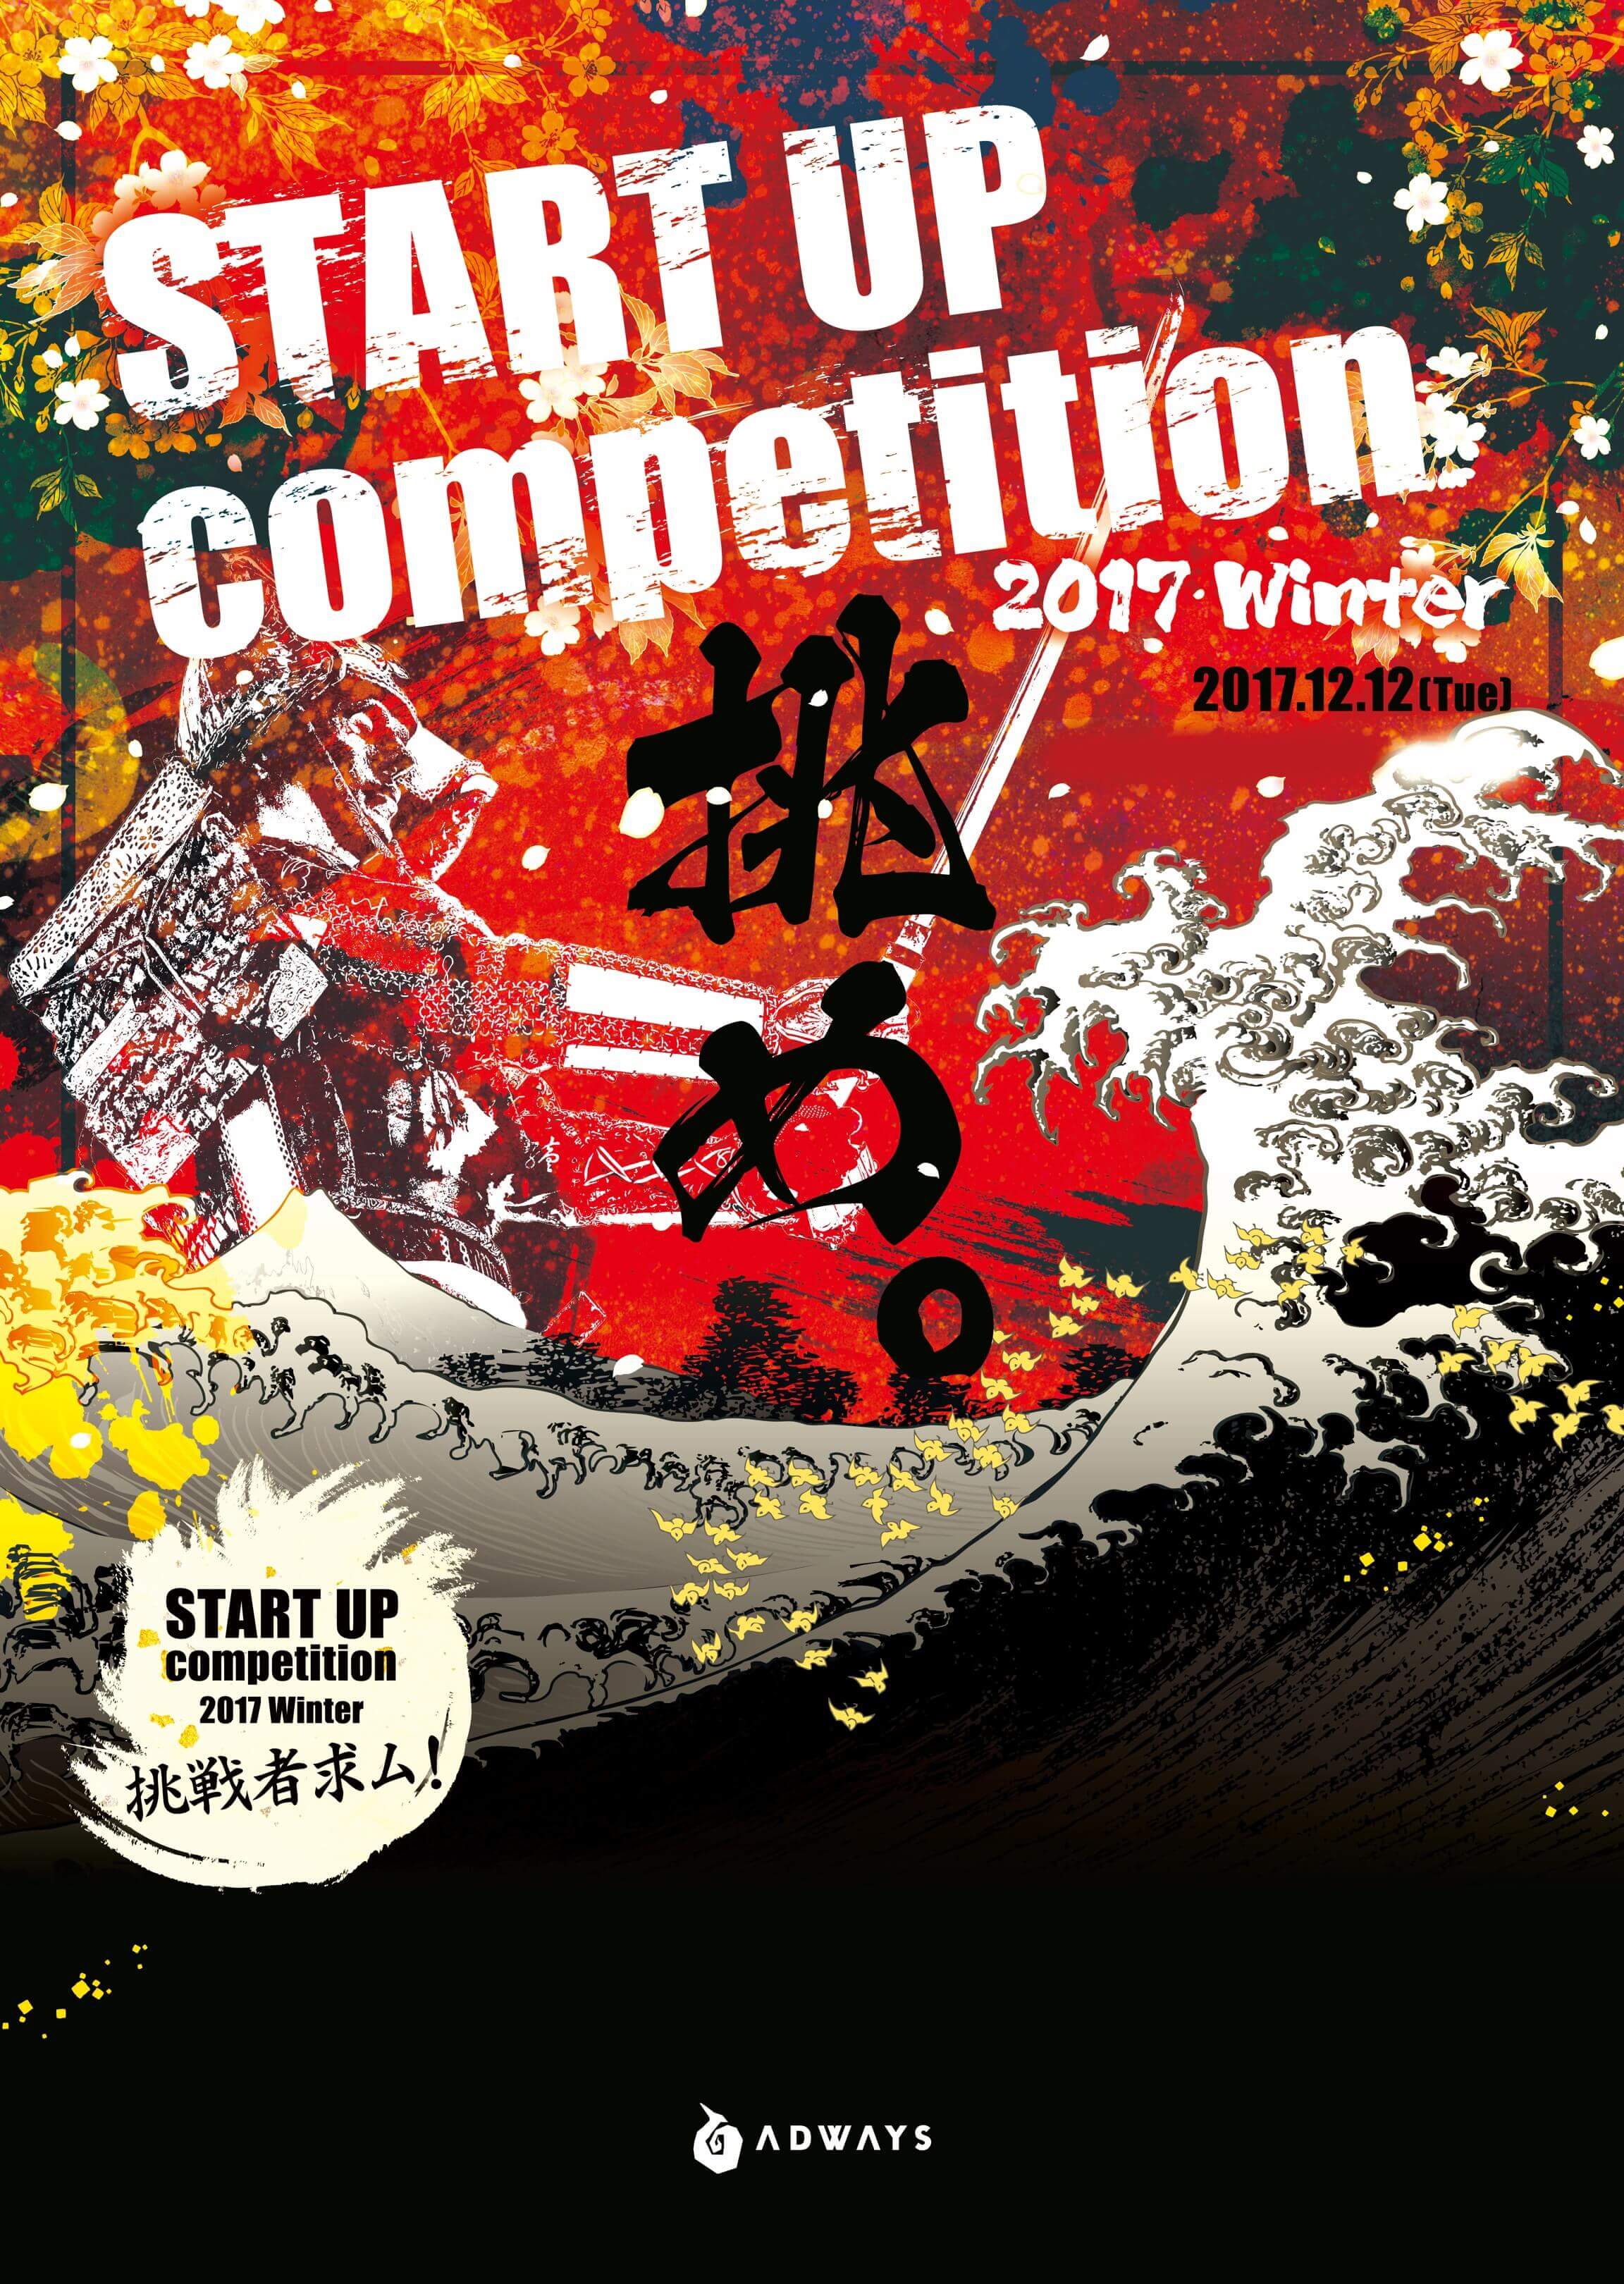 START UP competition Image